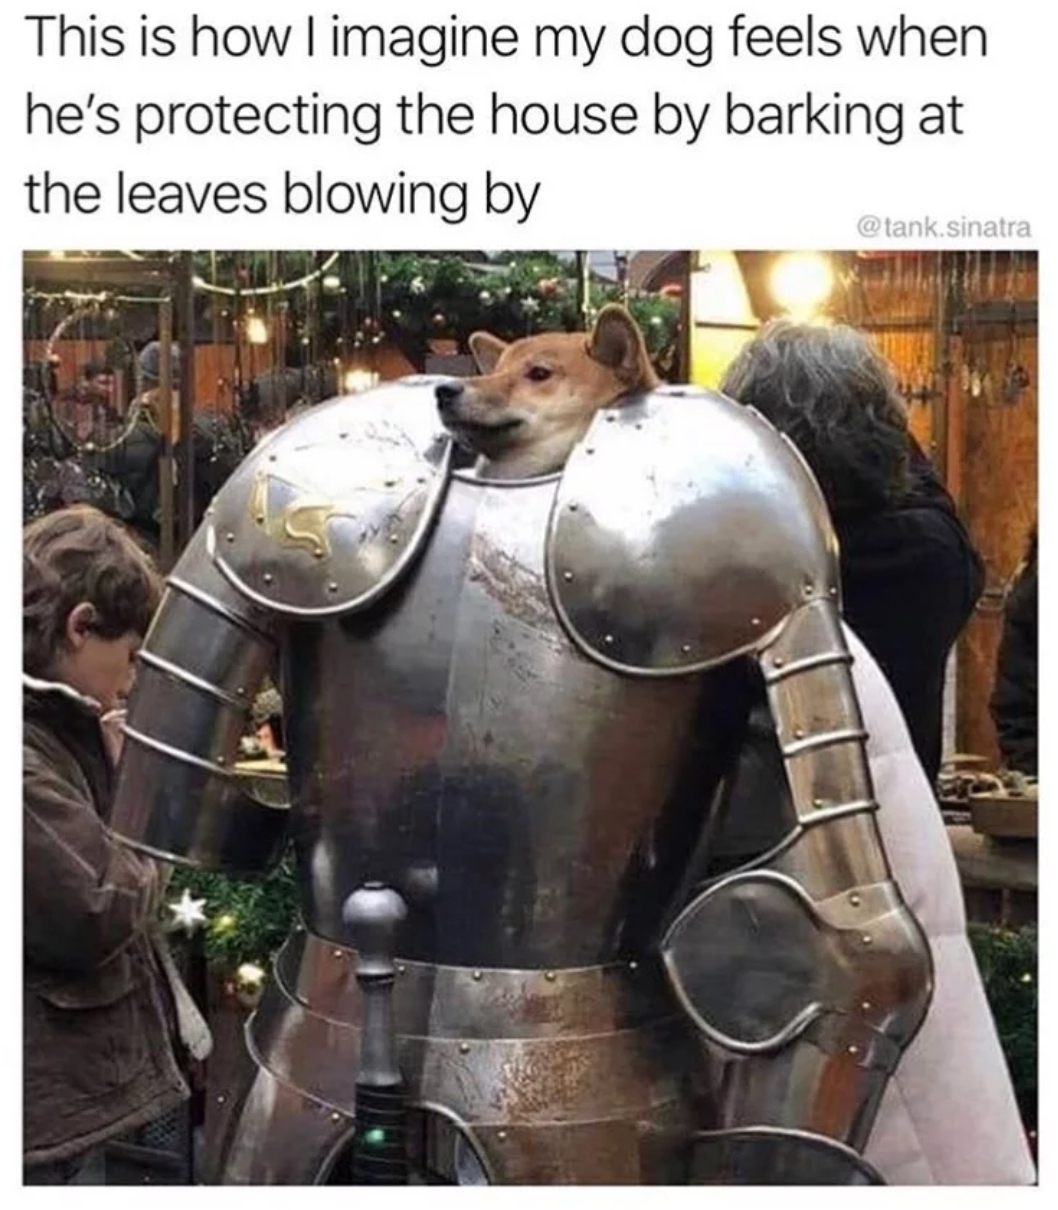 iron dogo - This is how I imagine my dog feels when he's protecting the house by barking at the leaves blowing by tank sinatra